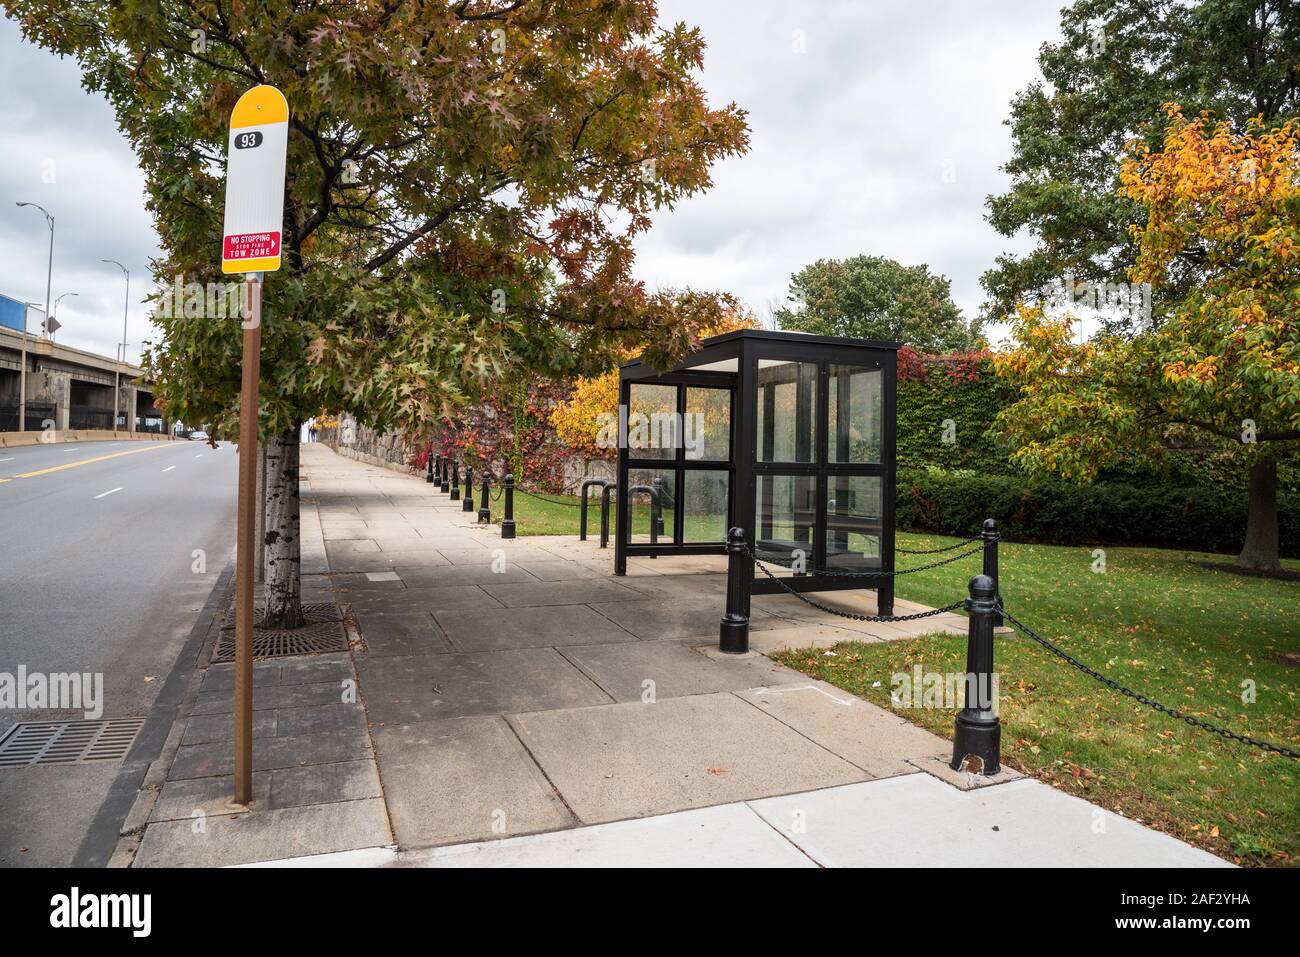 Deserted bus stop with a glass shelter along a street on a cloudy autumn day Stock Photo